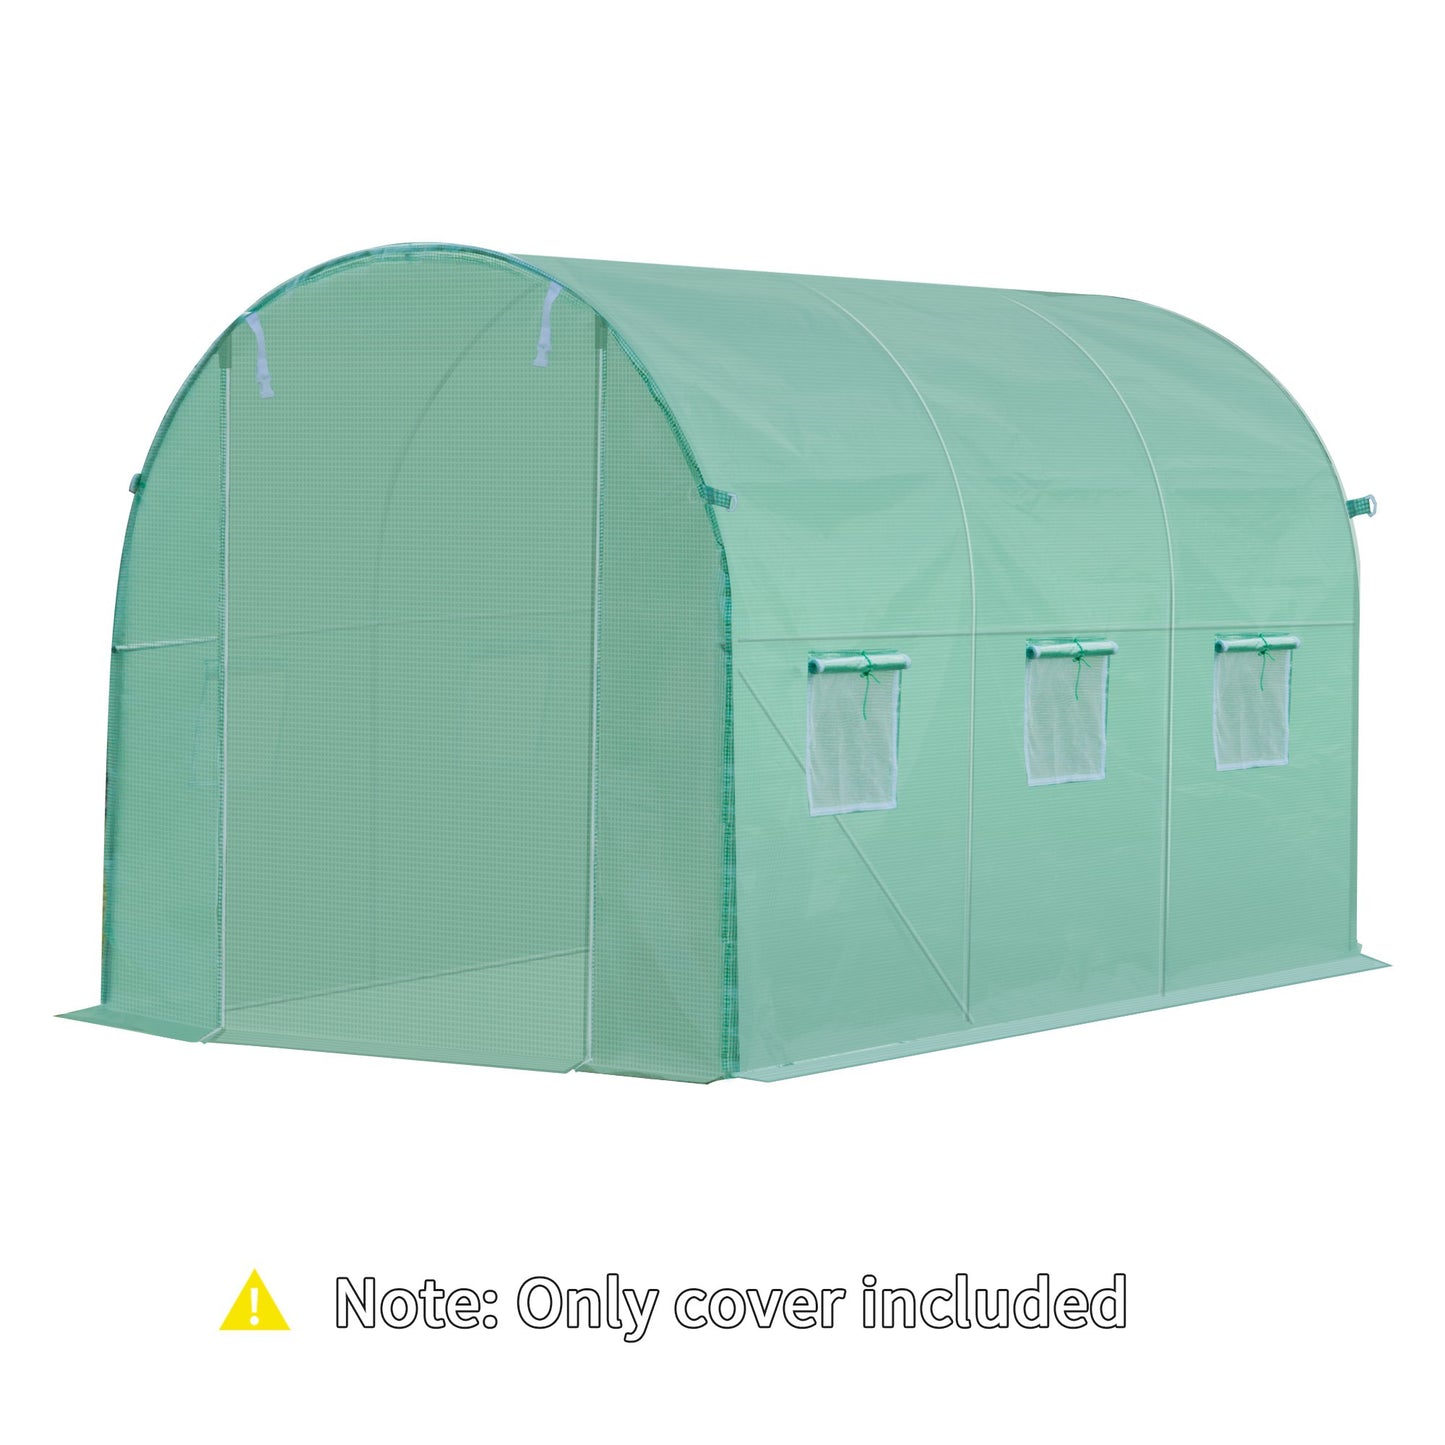 Outsunny 10x7ft Greenhouse Replacement Cover for Tunnel Walk-in Greenhouse w/ Windows Door